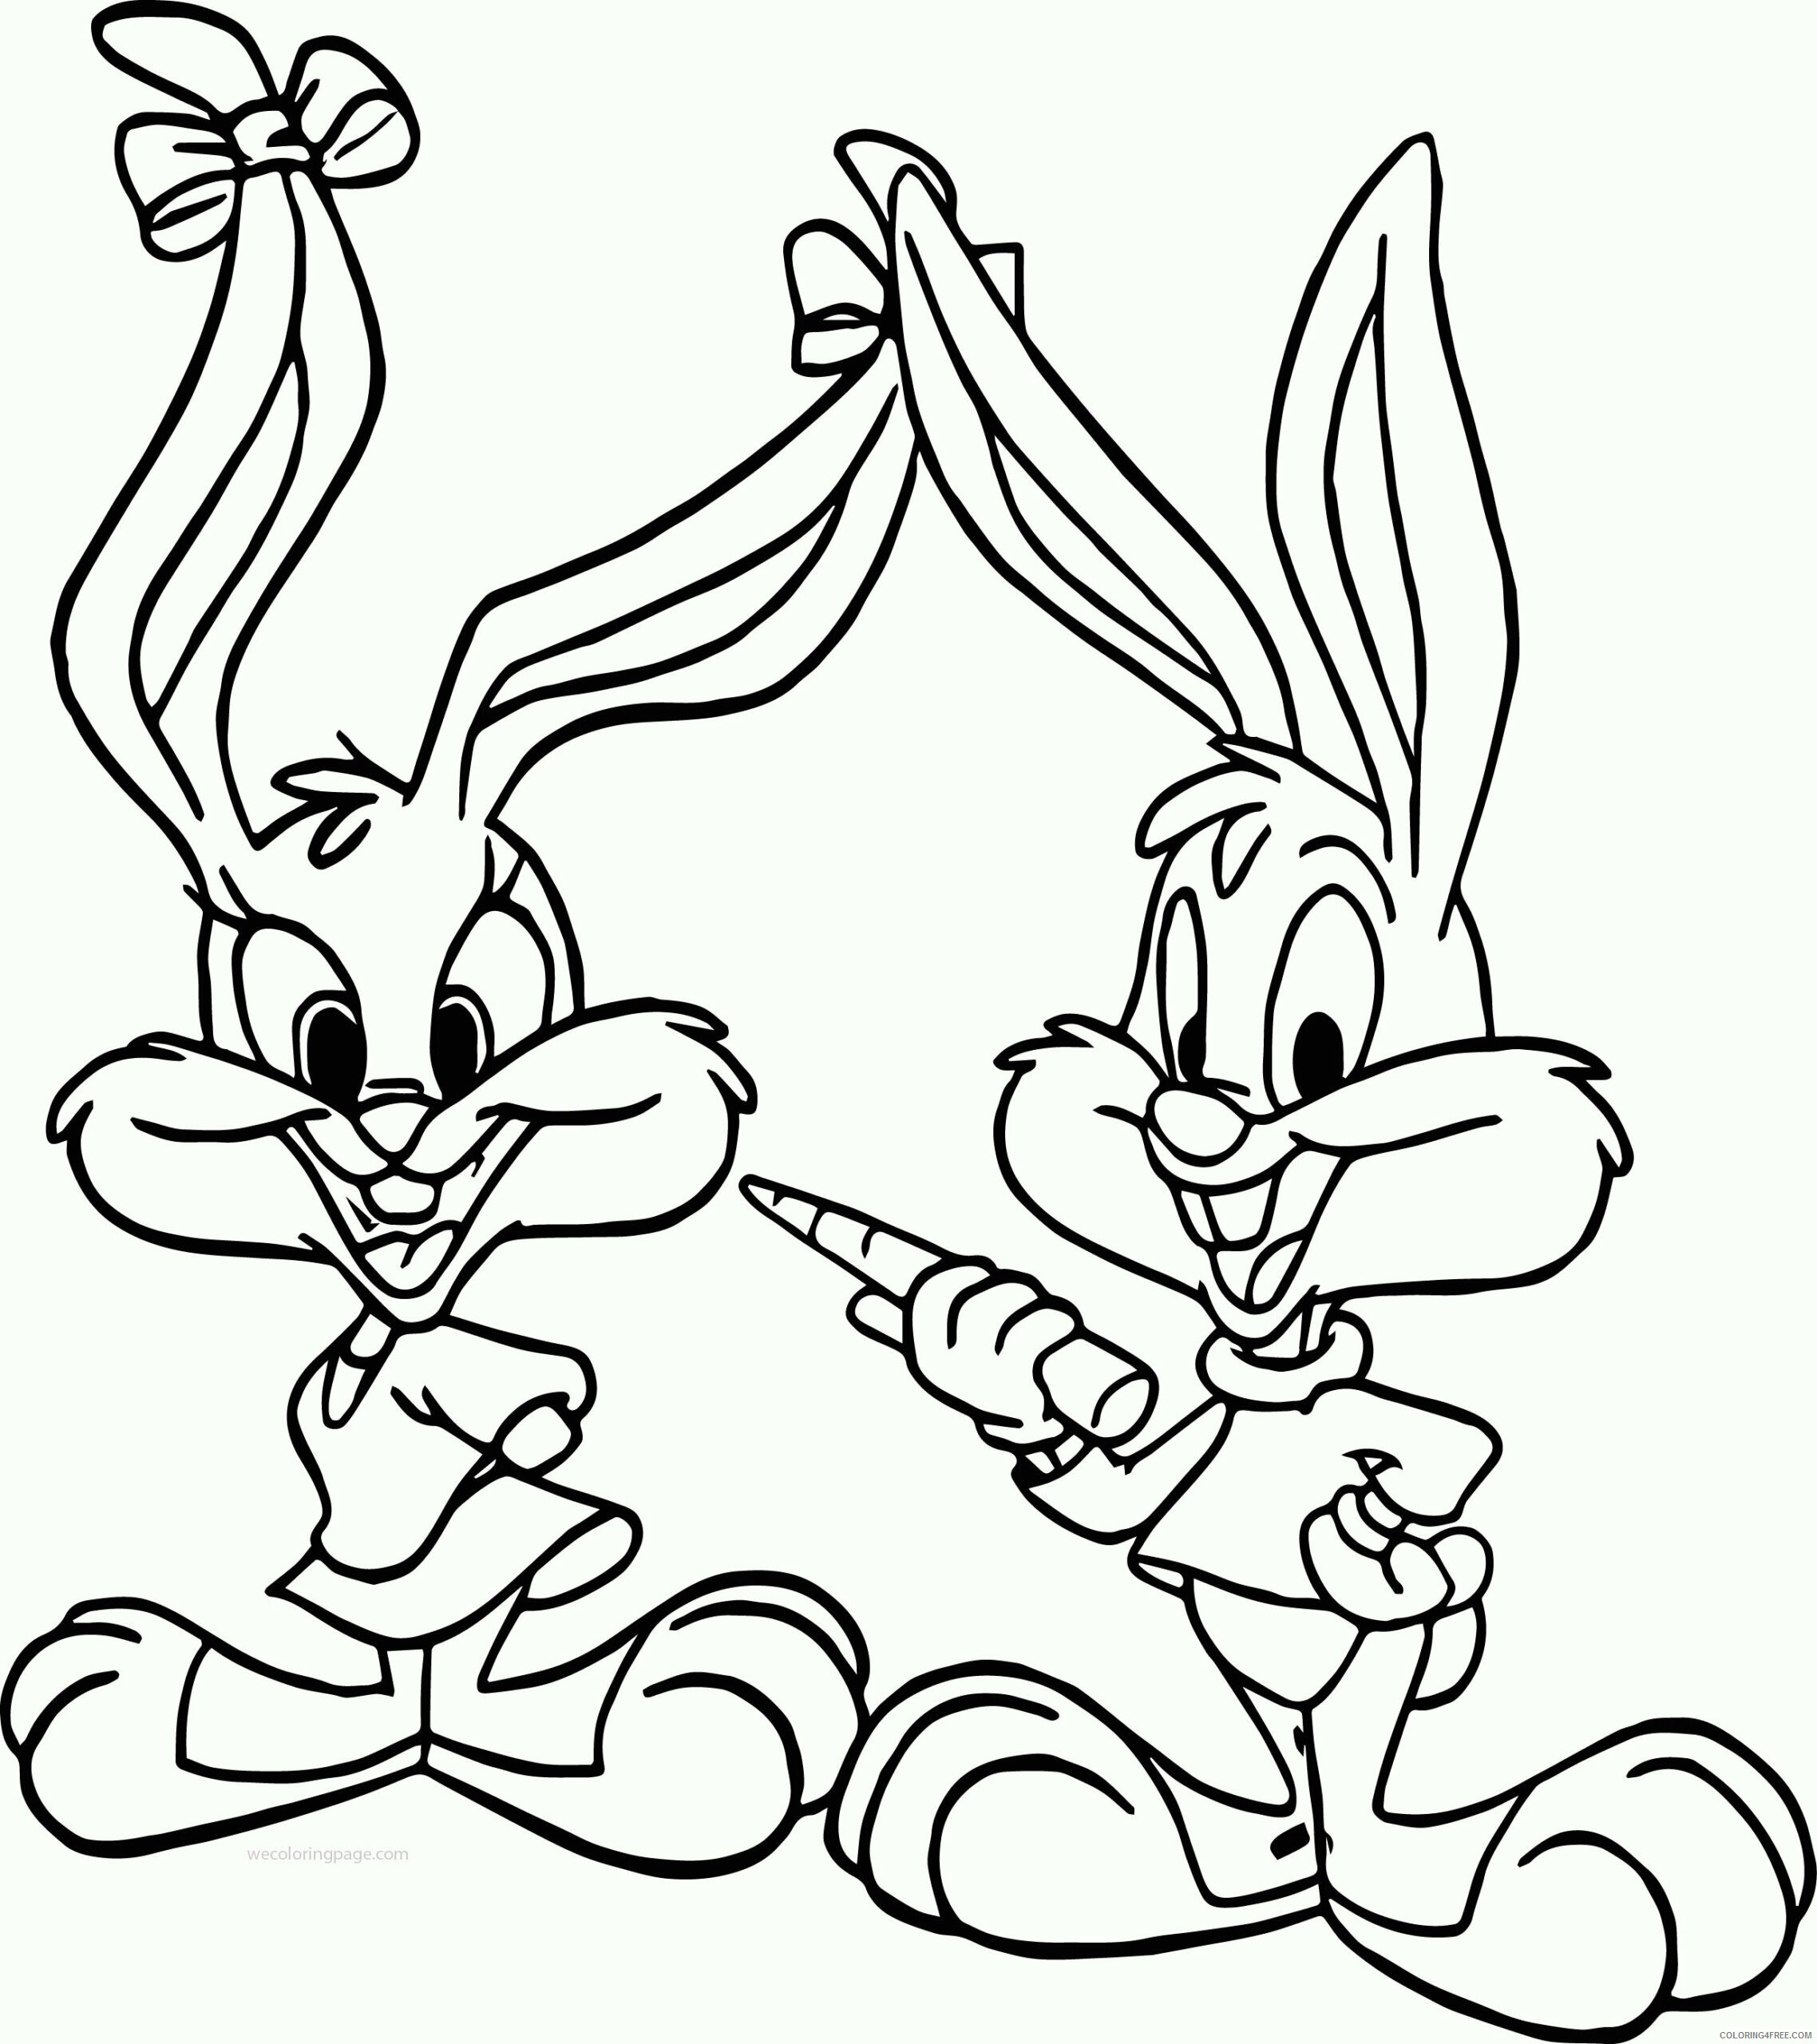 Bunny Coloring Sheets Animal Coloring Pages Printable 2021 0584 Coloring4free